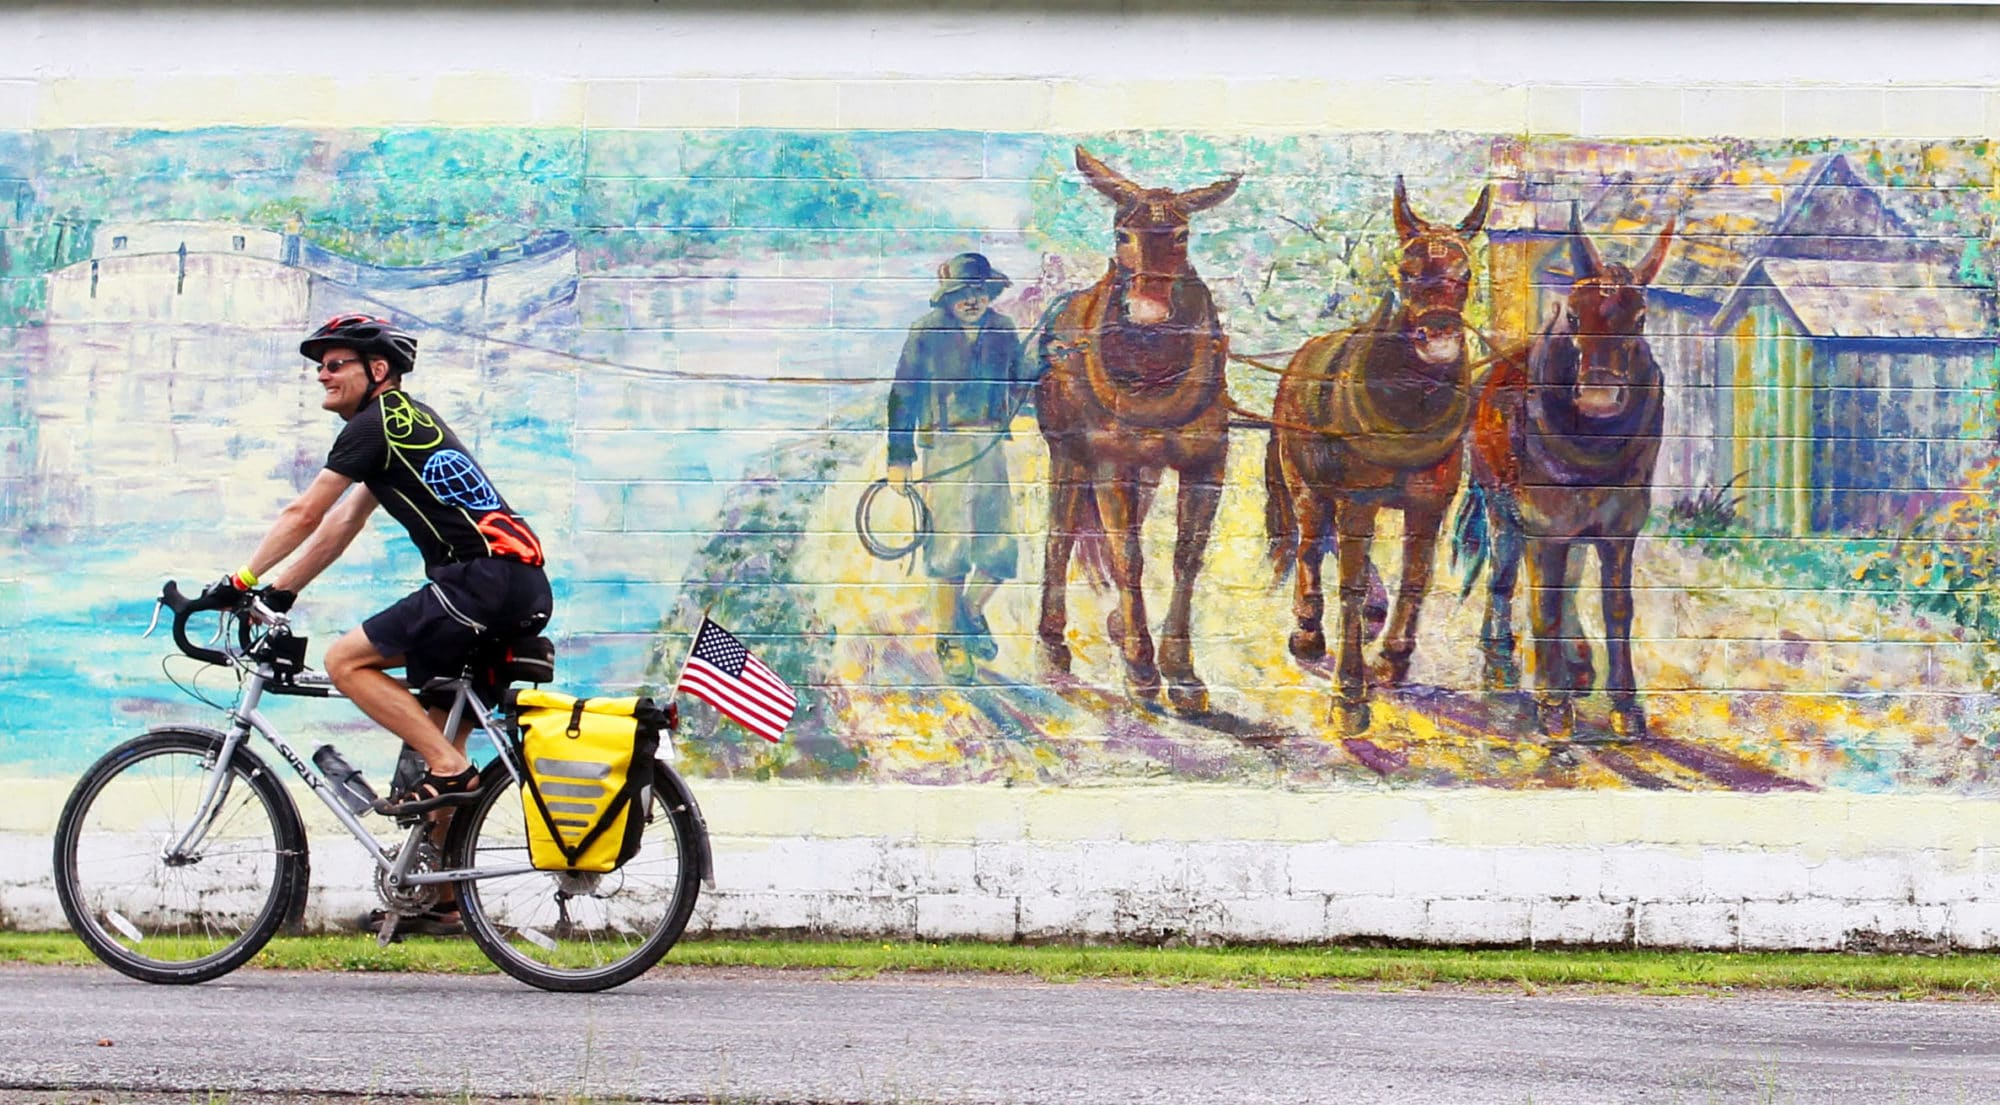 Empire State Trail photos: A colorful cyclist rides past a large painted mural along the Erie Canalway Trail, part of New York's new Empire State Trail.